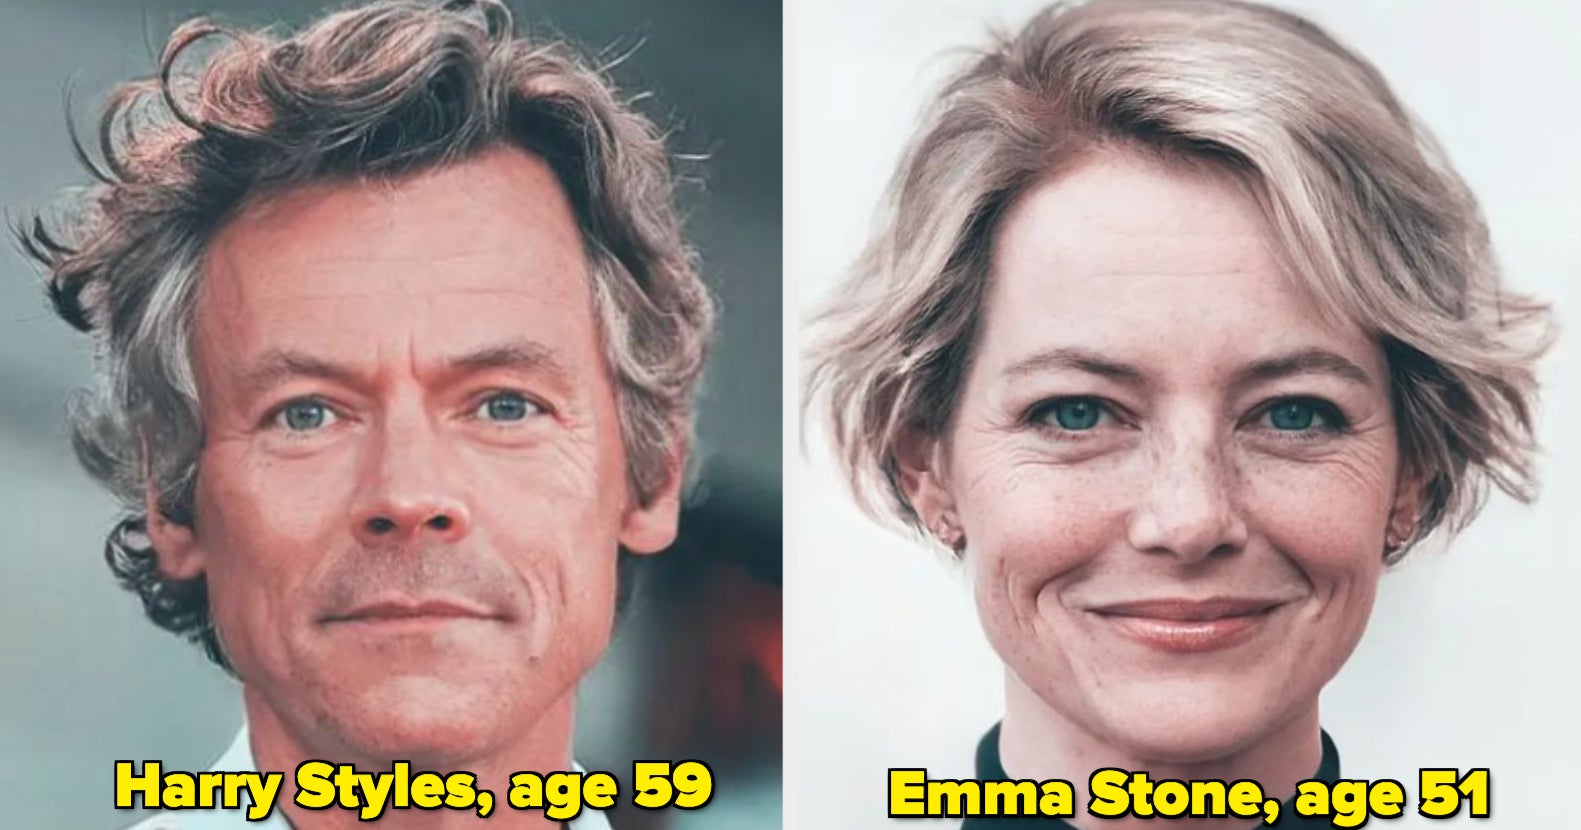 They shall grow old: How AI is bringing back celebrities like